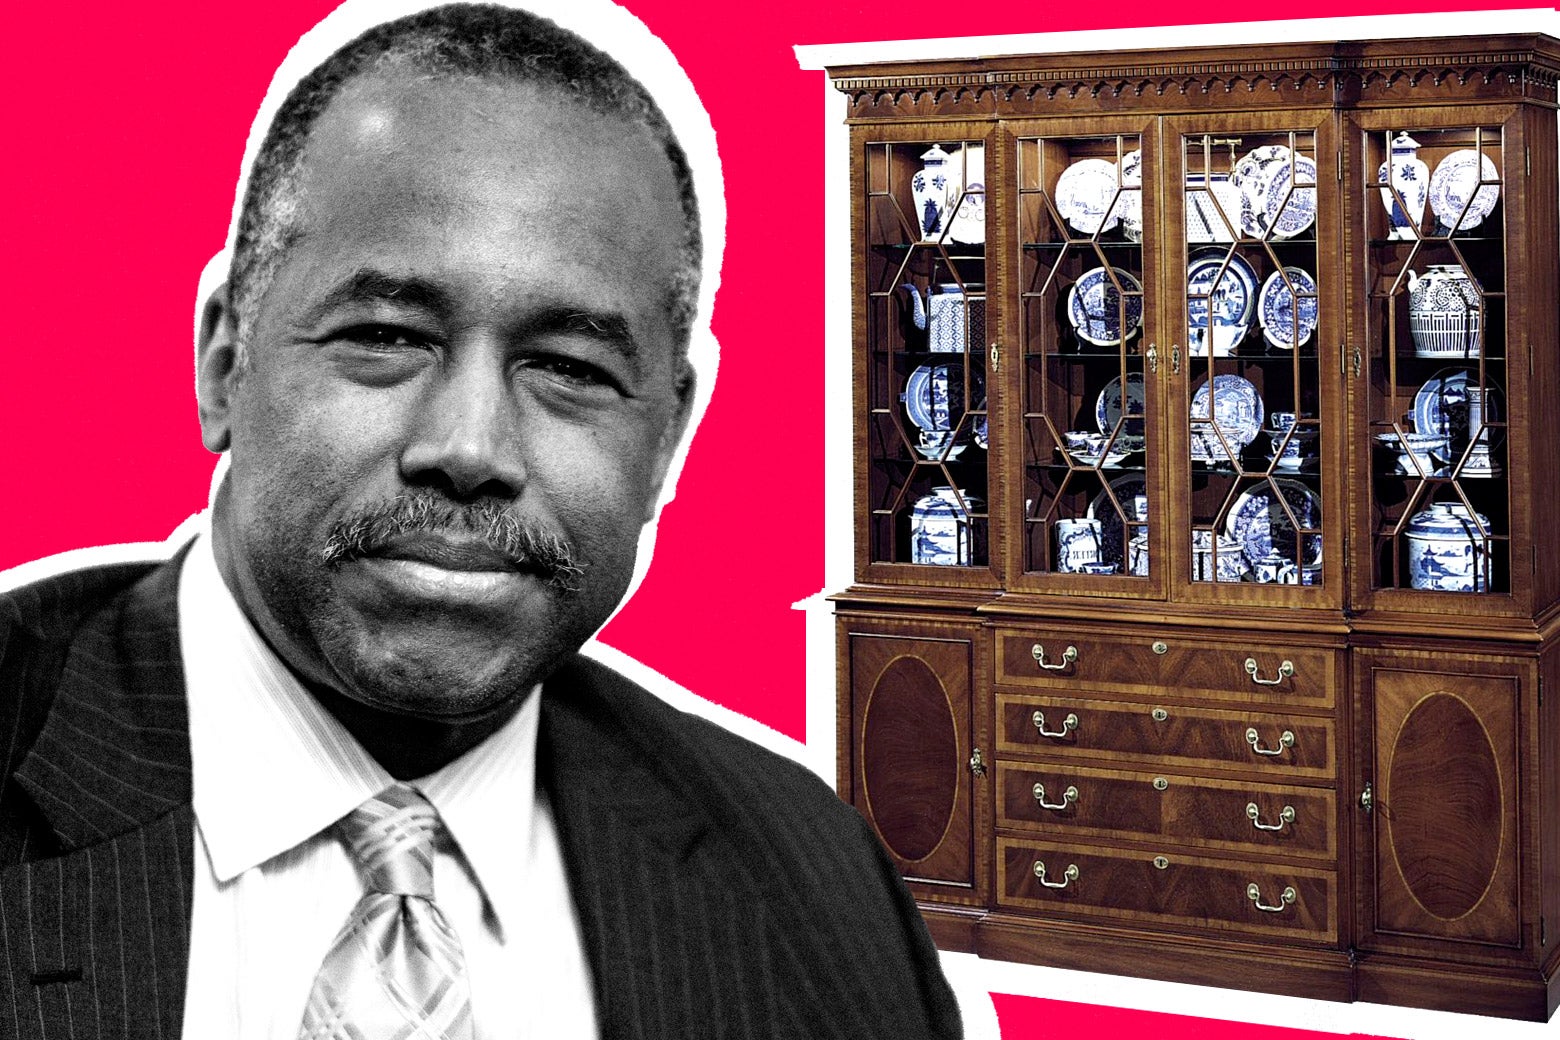 Ben Carson in front of expensive furniture.